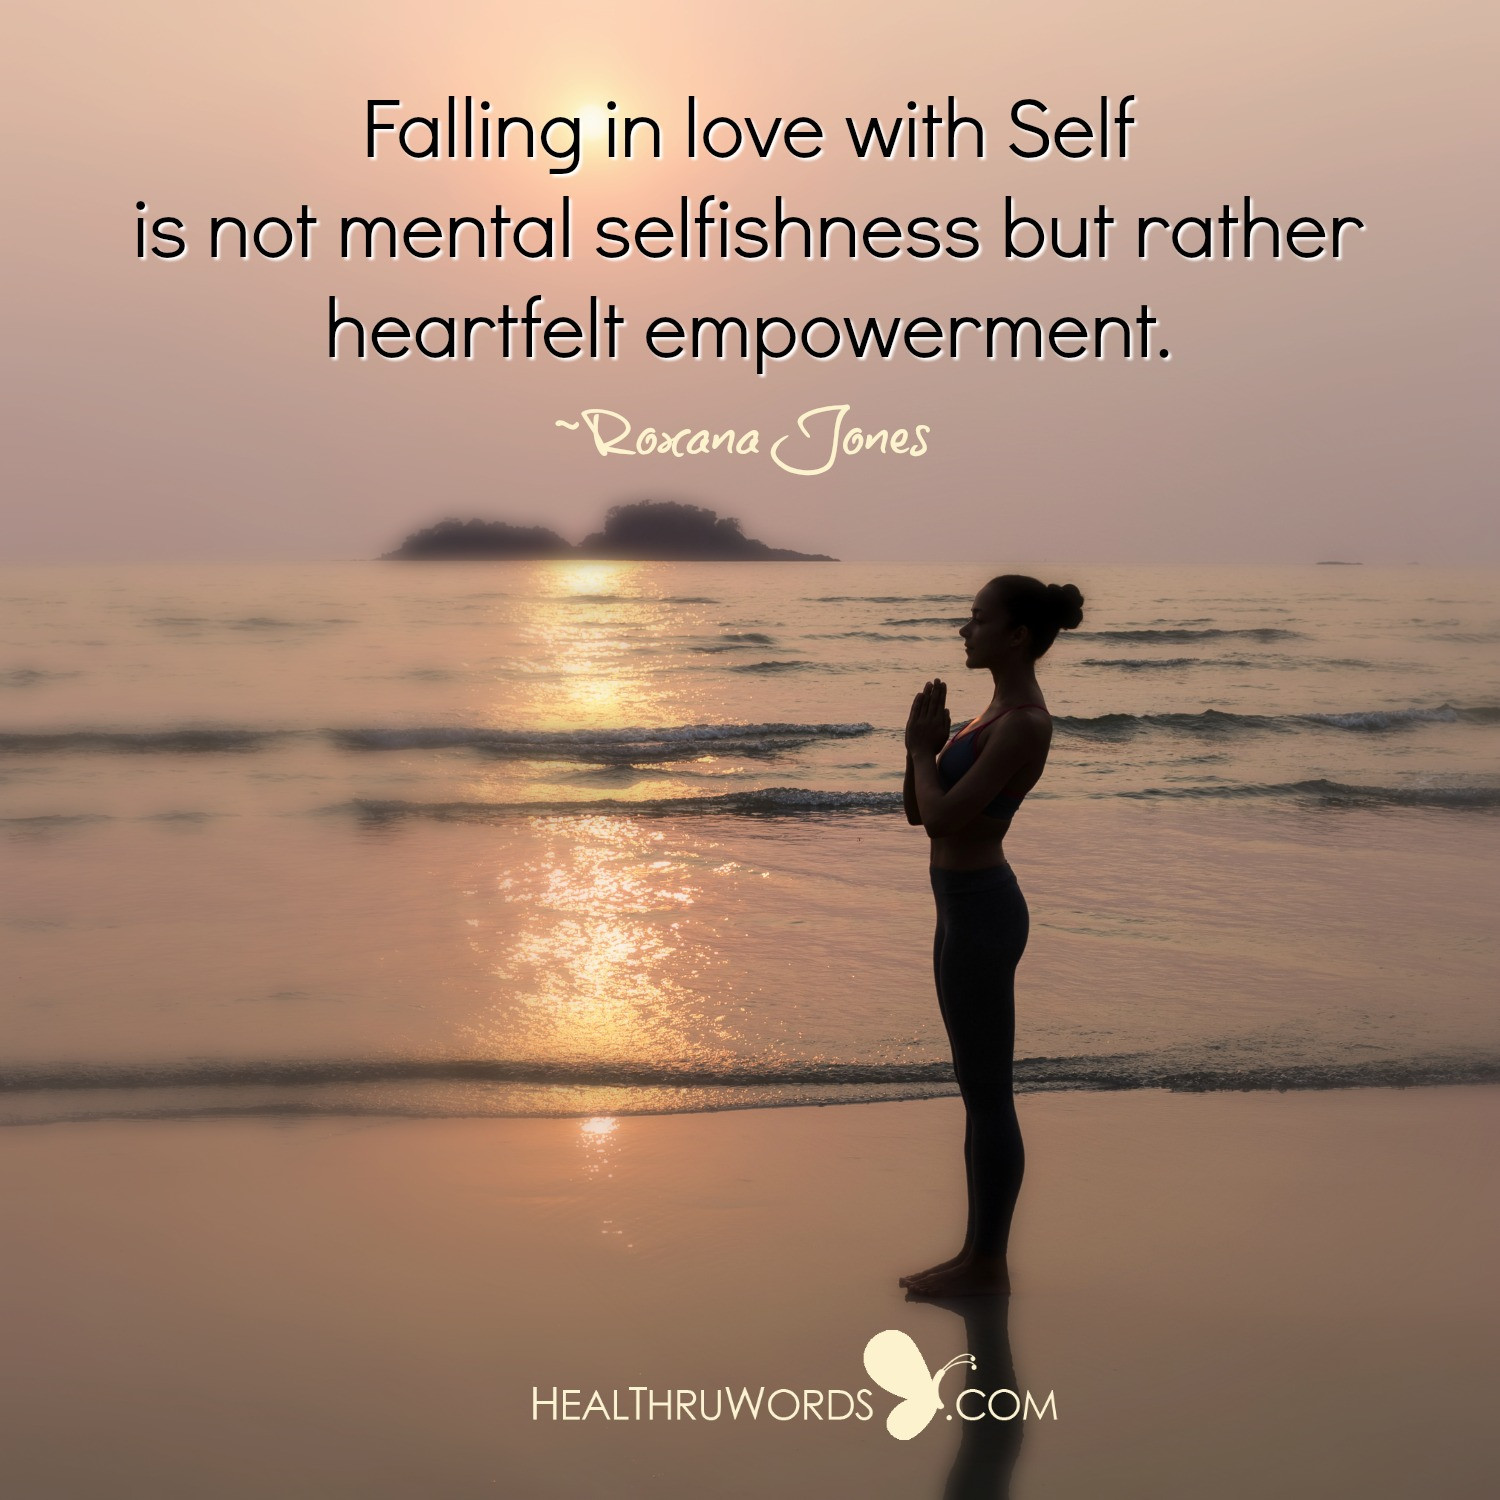 Selfish Relationships Quotes
 Self love vs Selfishness Inspirational and Quotes